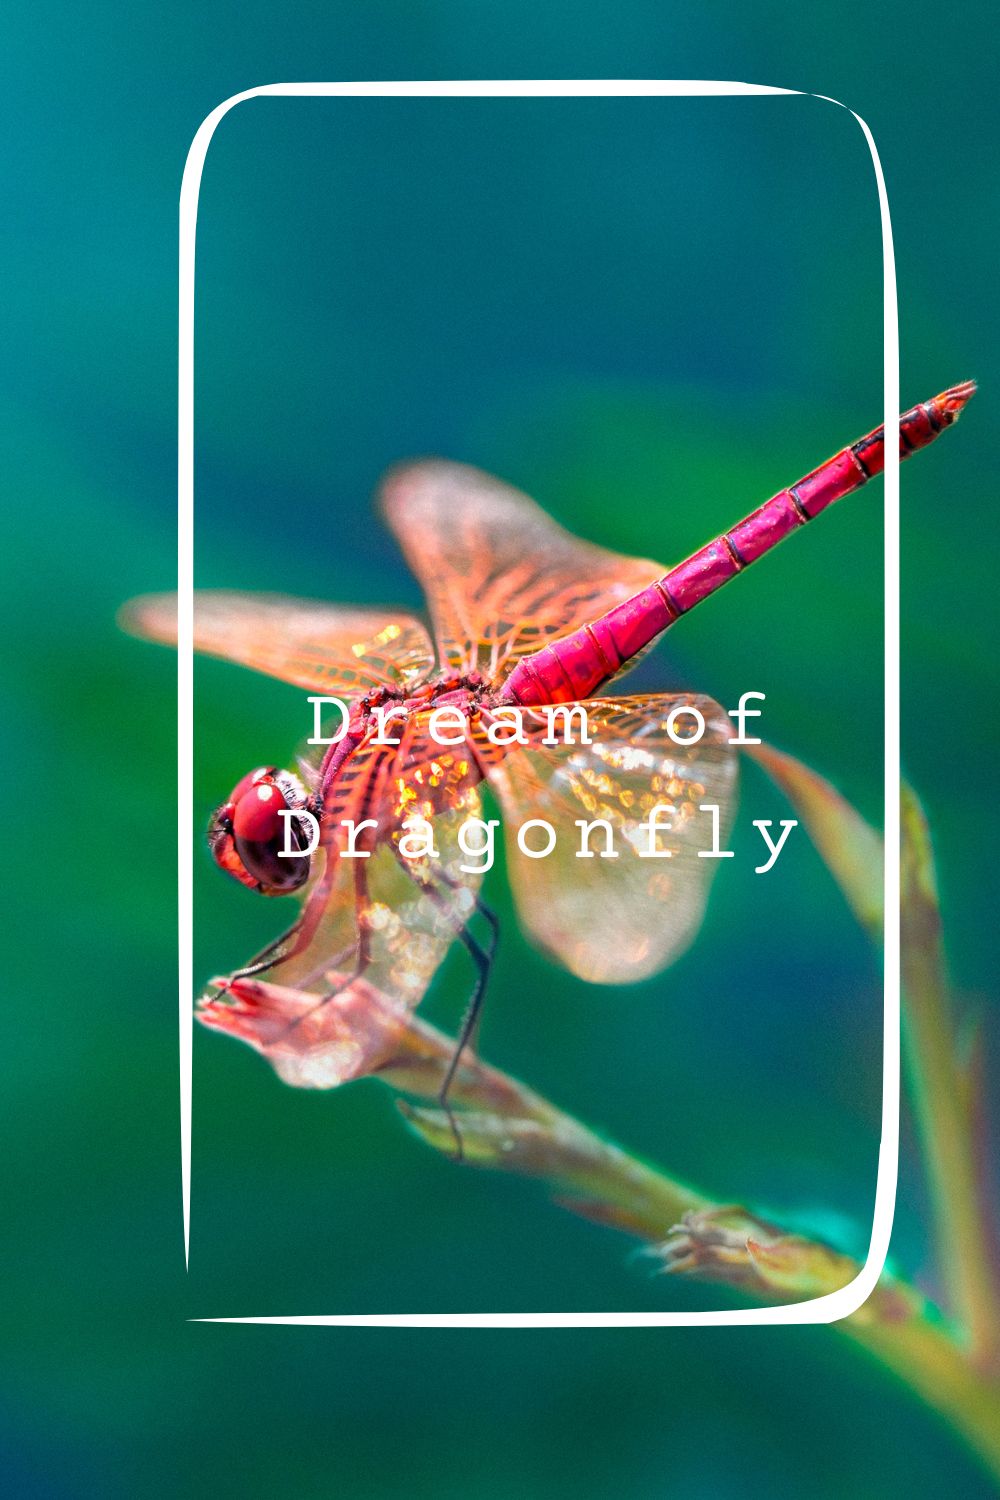 Dream of Dragonfly pin 2